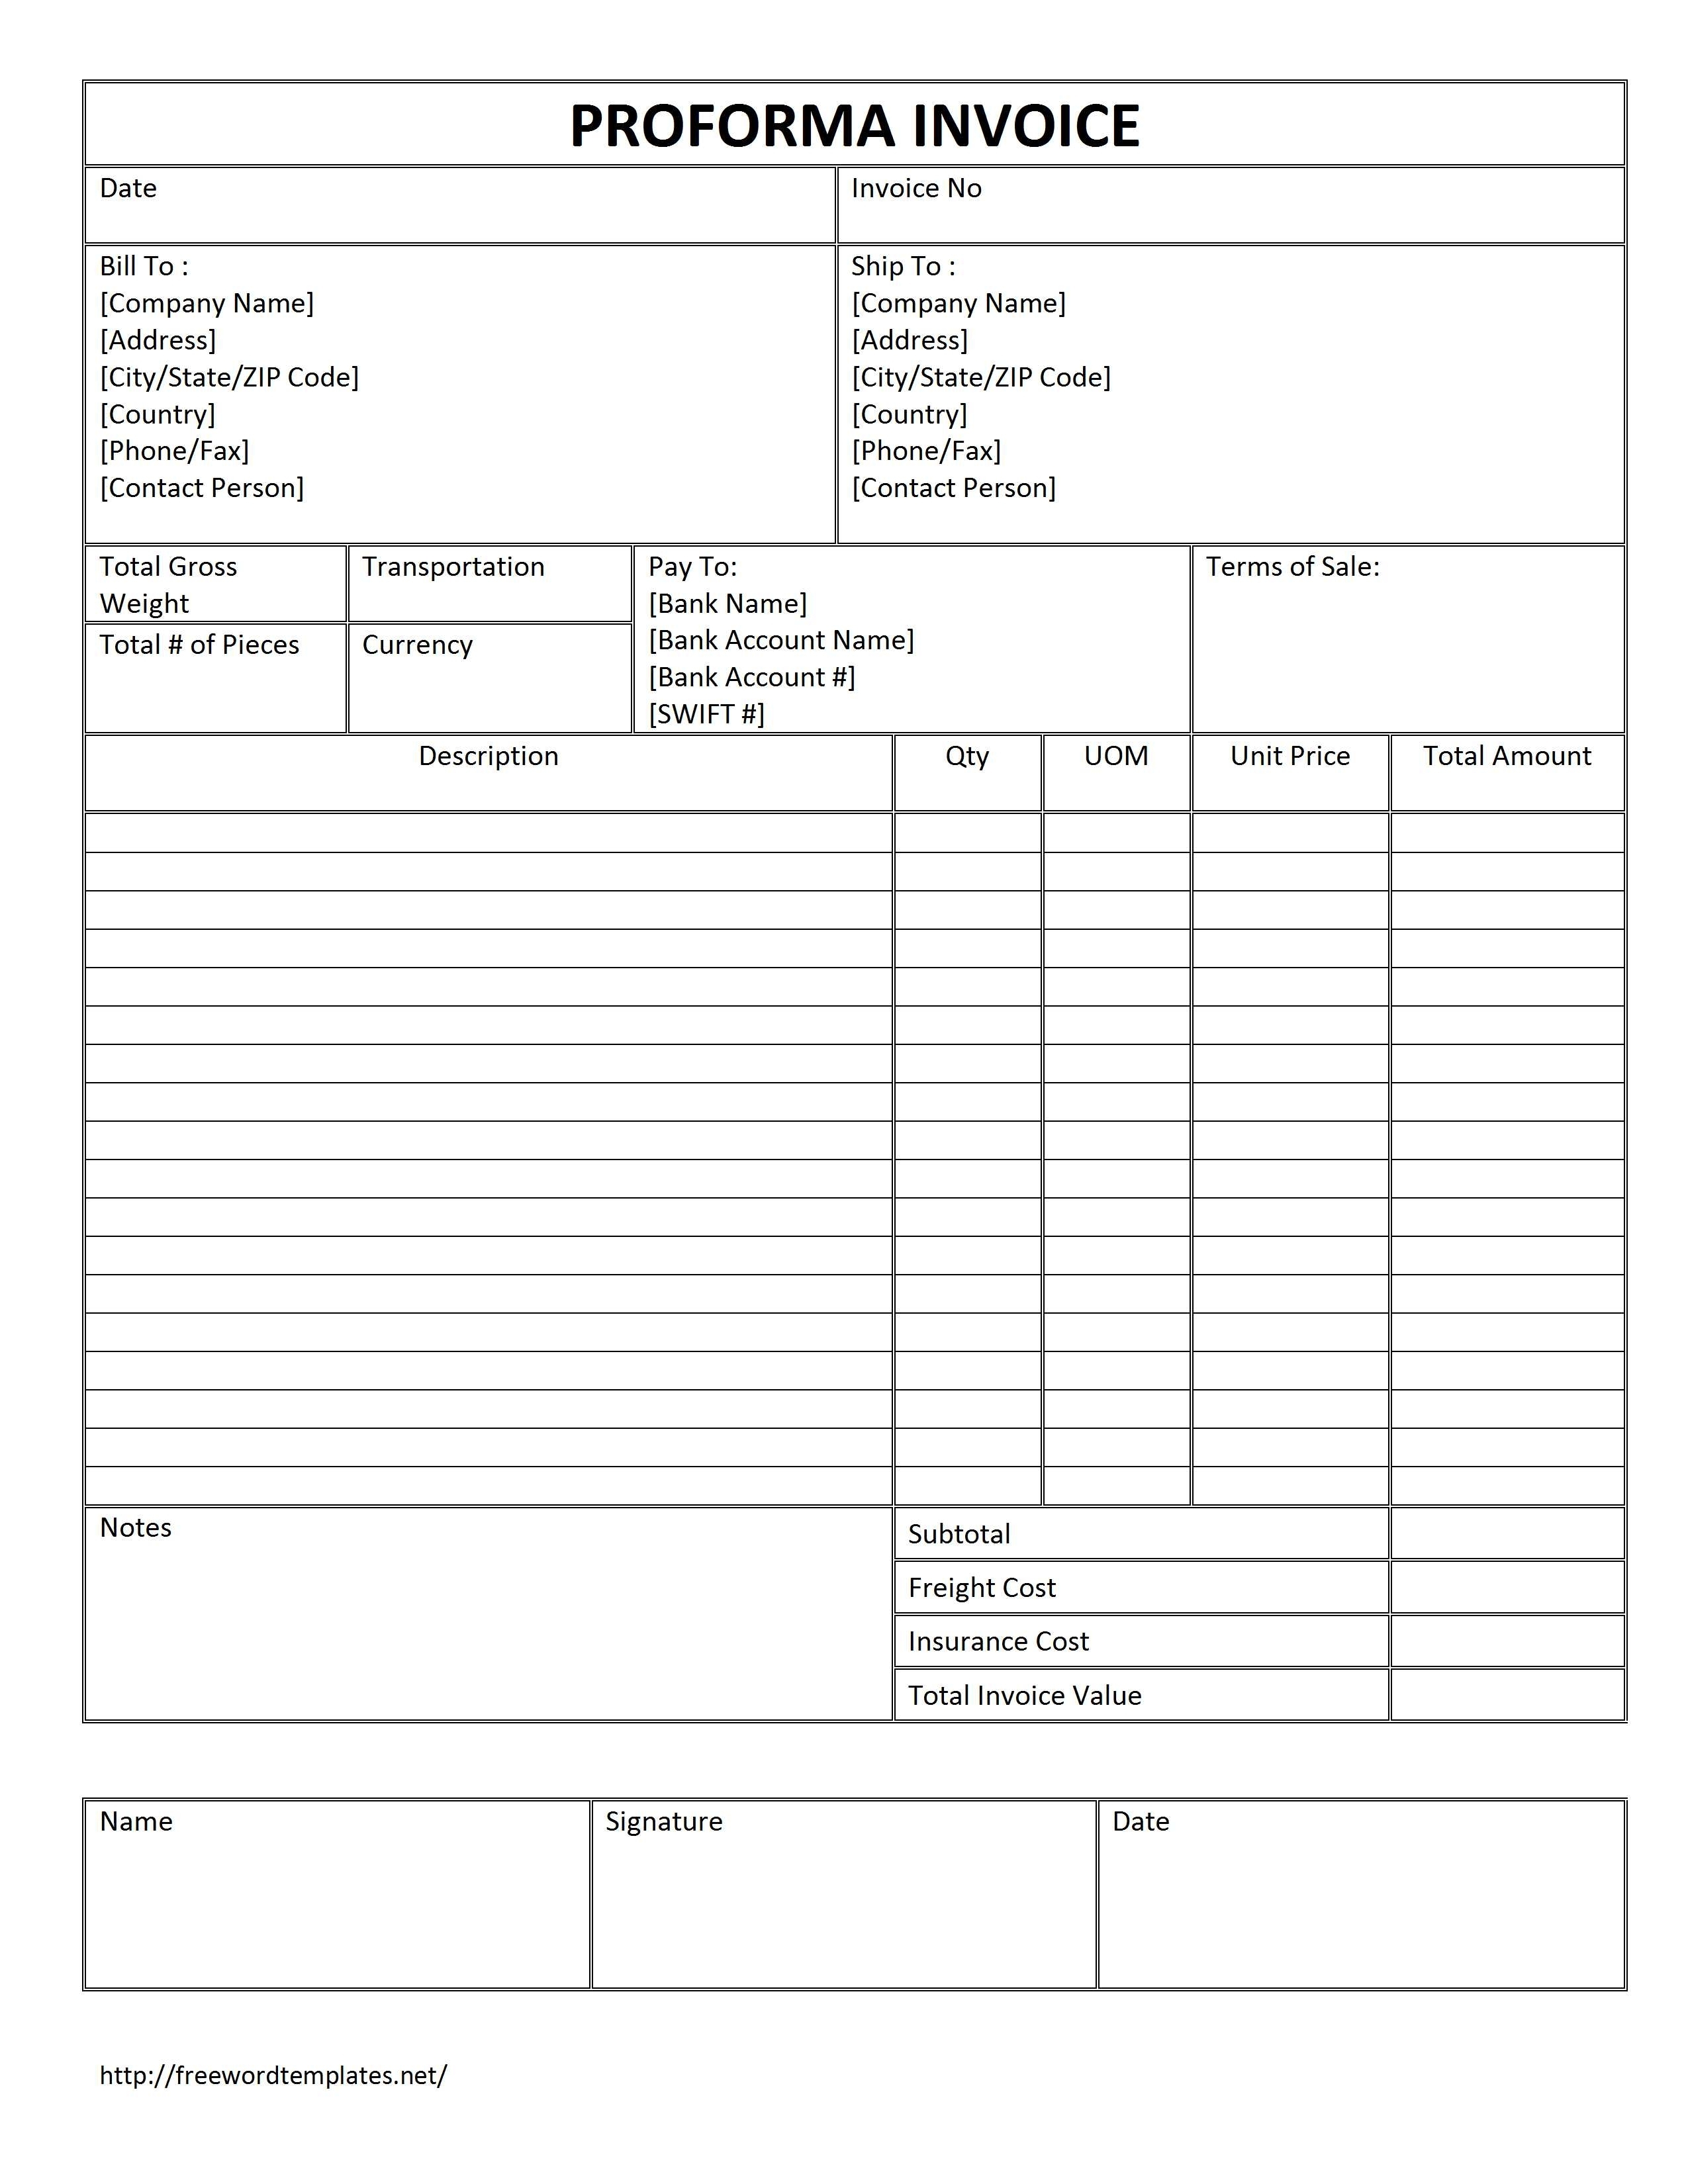 proforma invoice meaning meaning proforma invoice invoice template free 2016 2550 X 3300